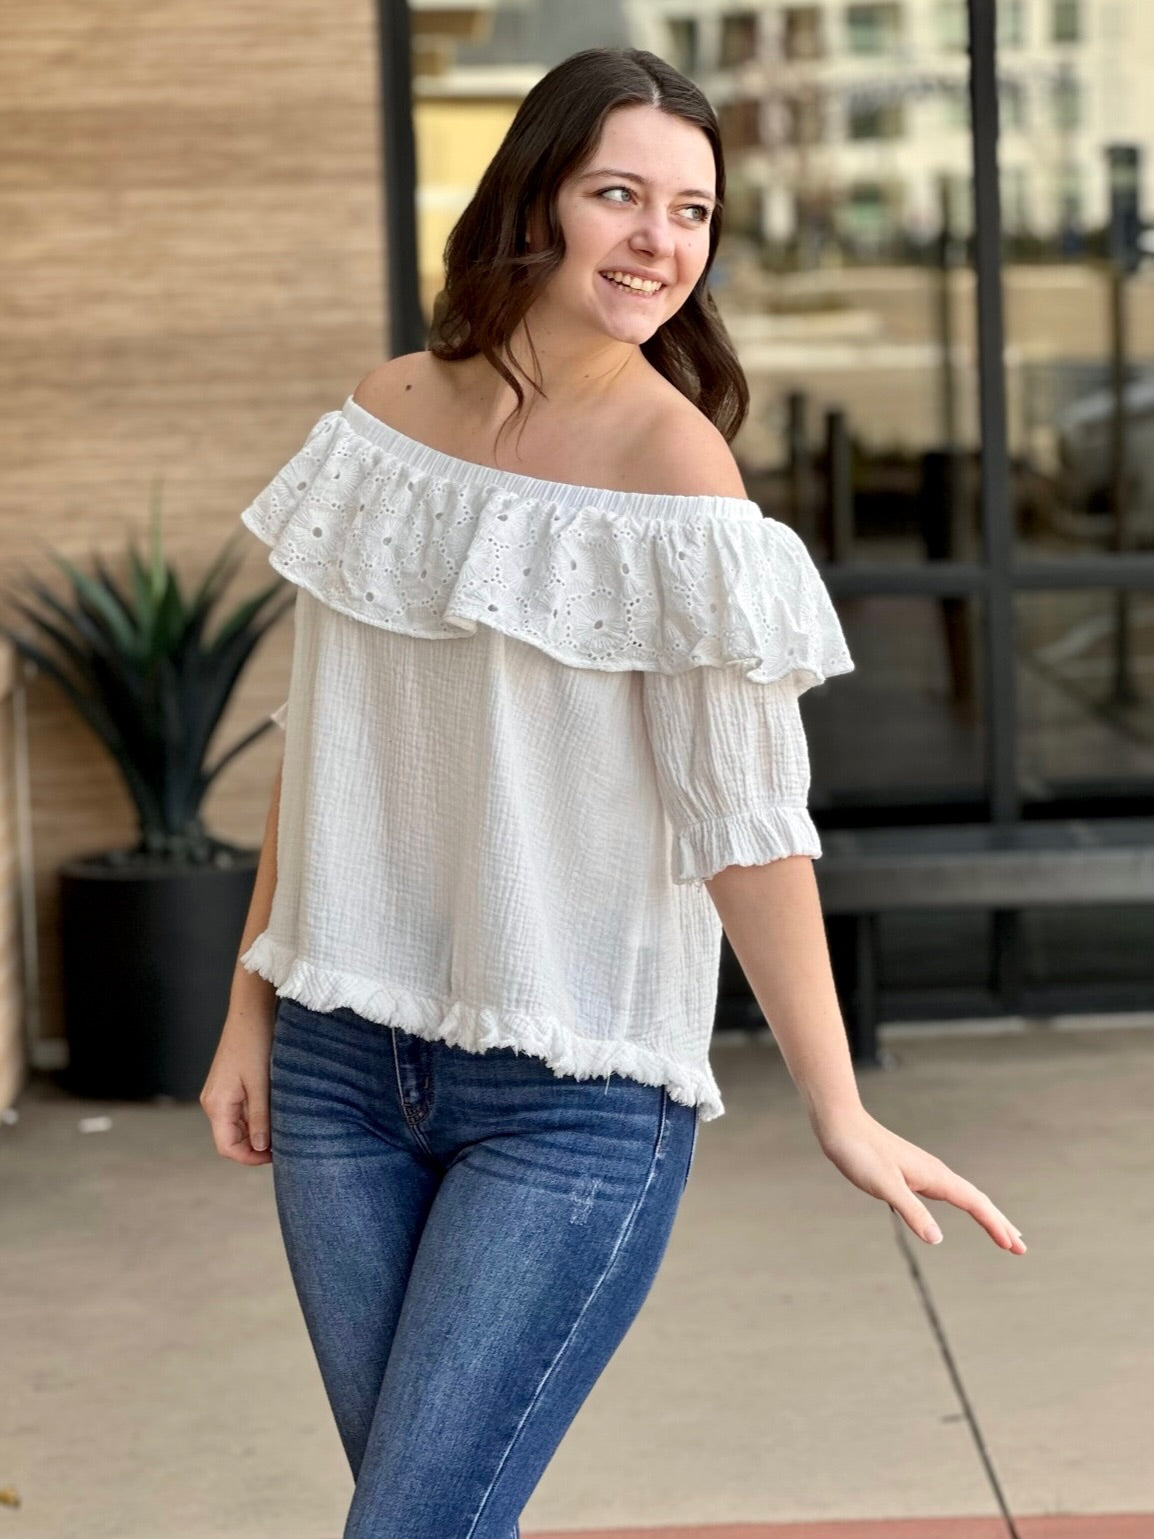 Megan in off white blouse looking to the side